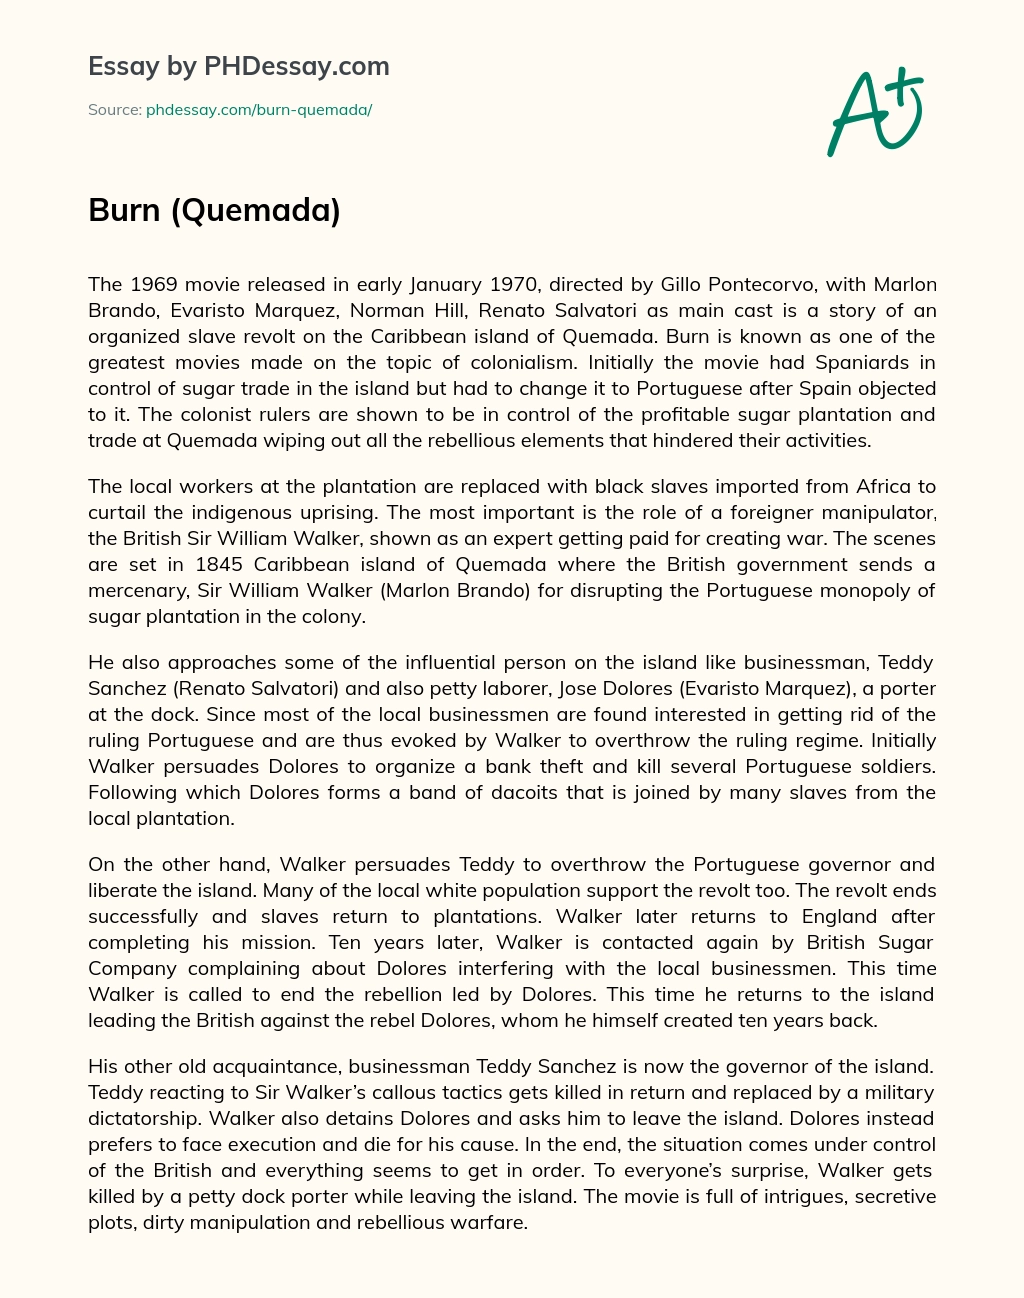 Burn: A Movie on Colonialism and Organized Slave Revolt in the Caribbean essay